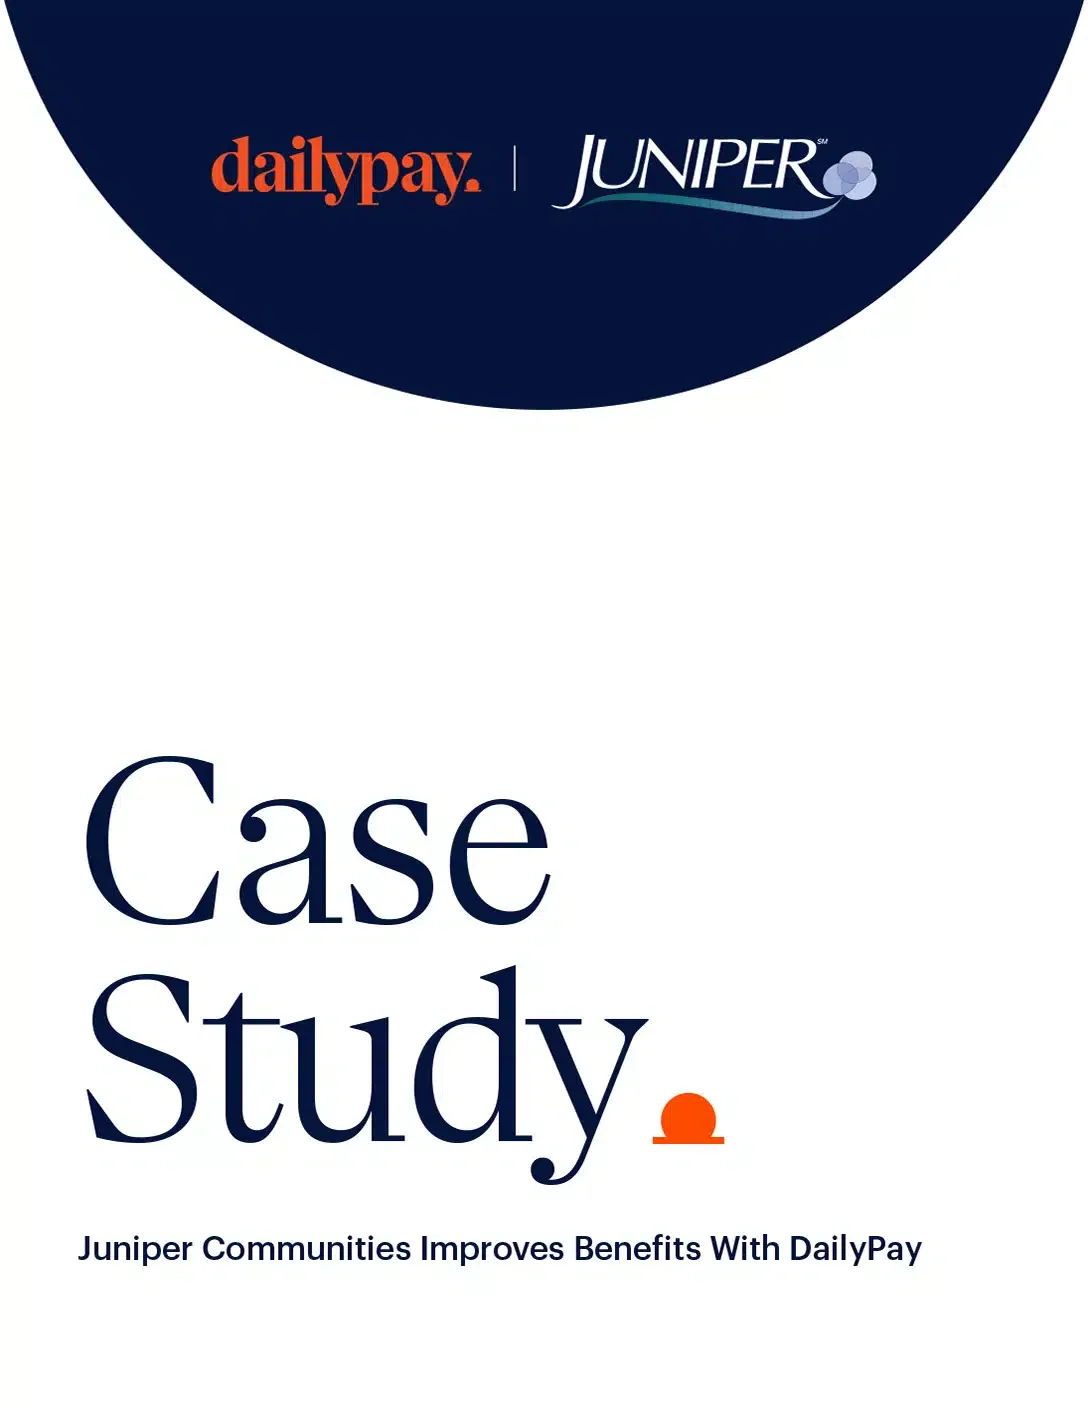 A case study cover showing logos for DailyPay and Juniper, titled "Case Study: Juniper Communities Improves Benefits With DailyPay.